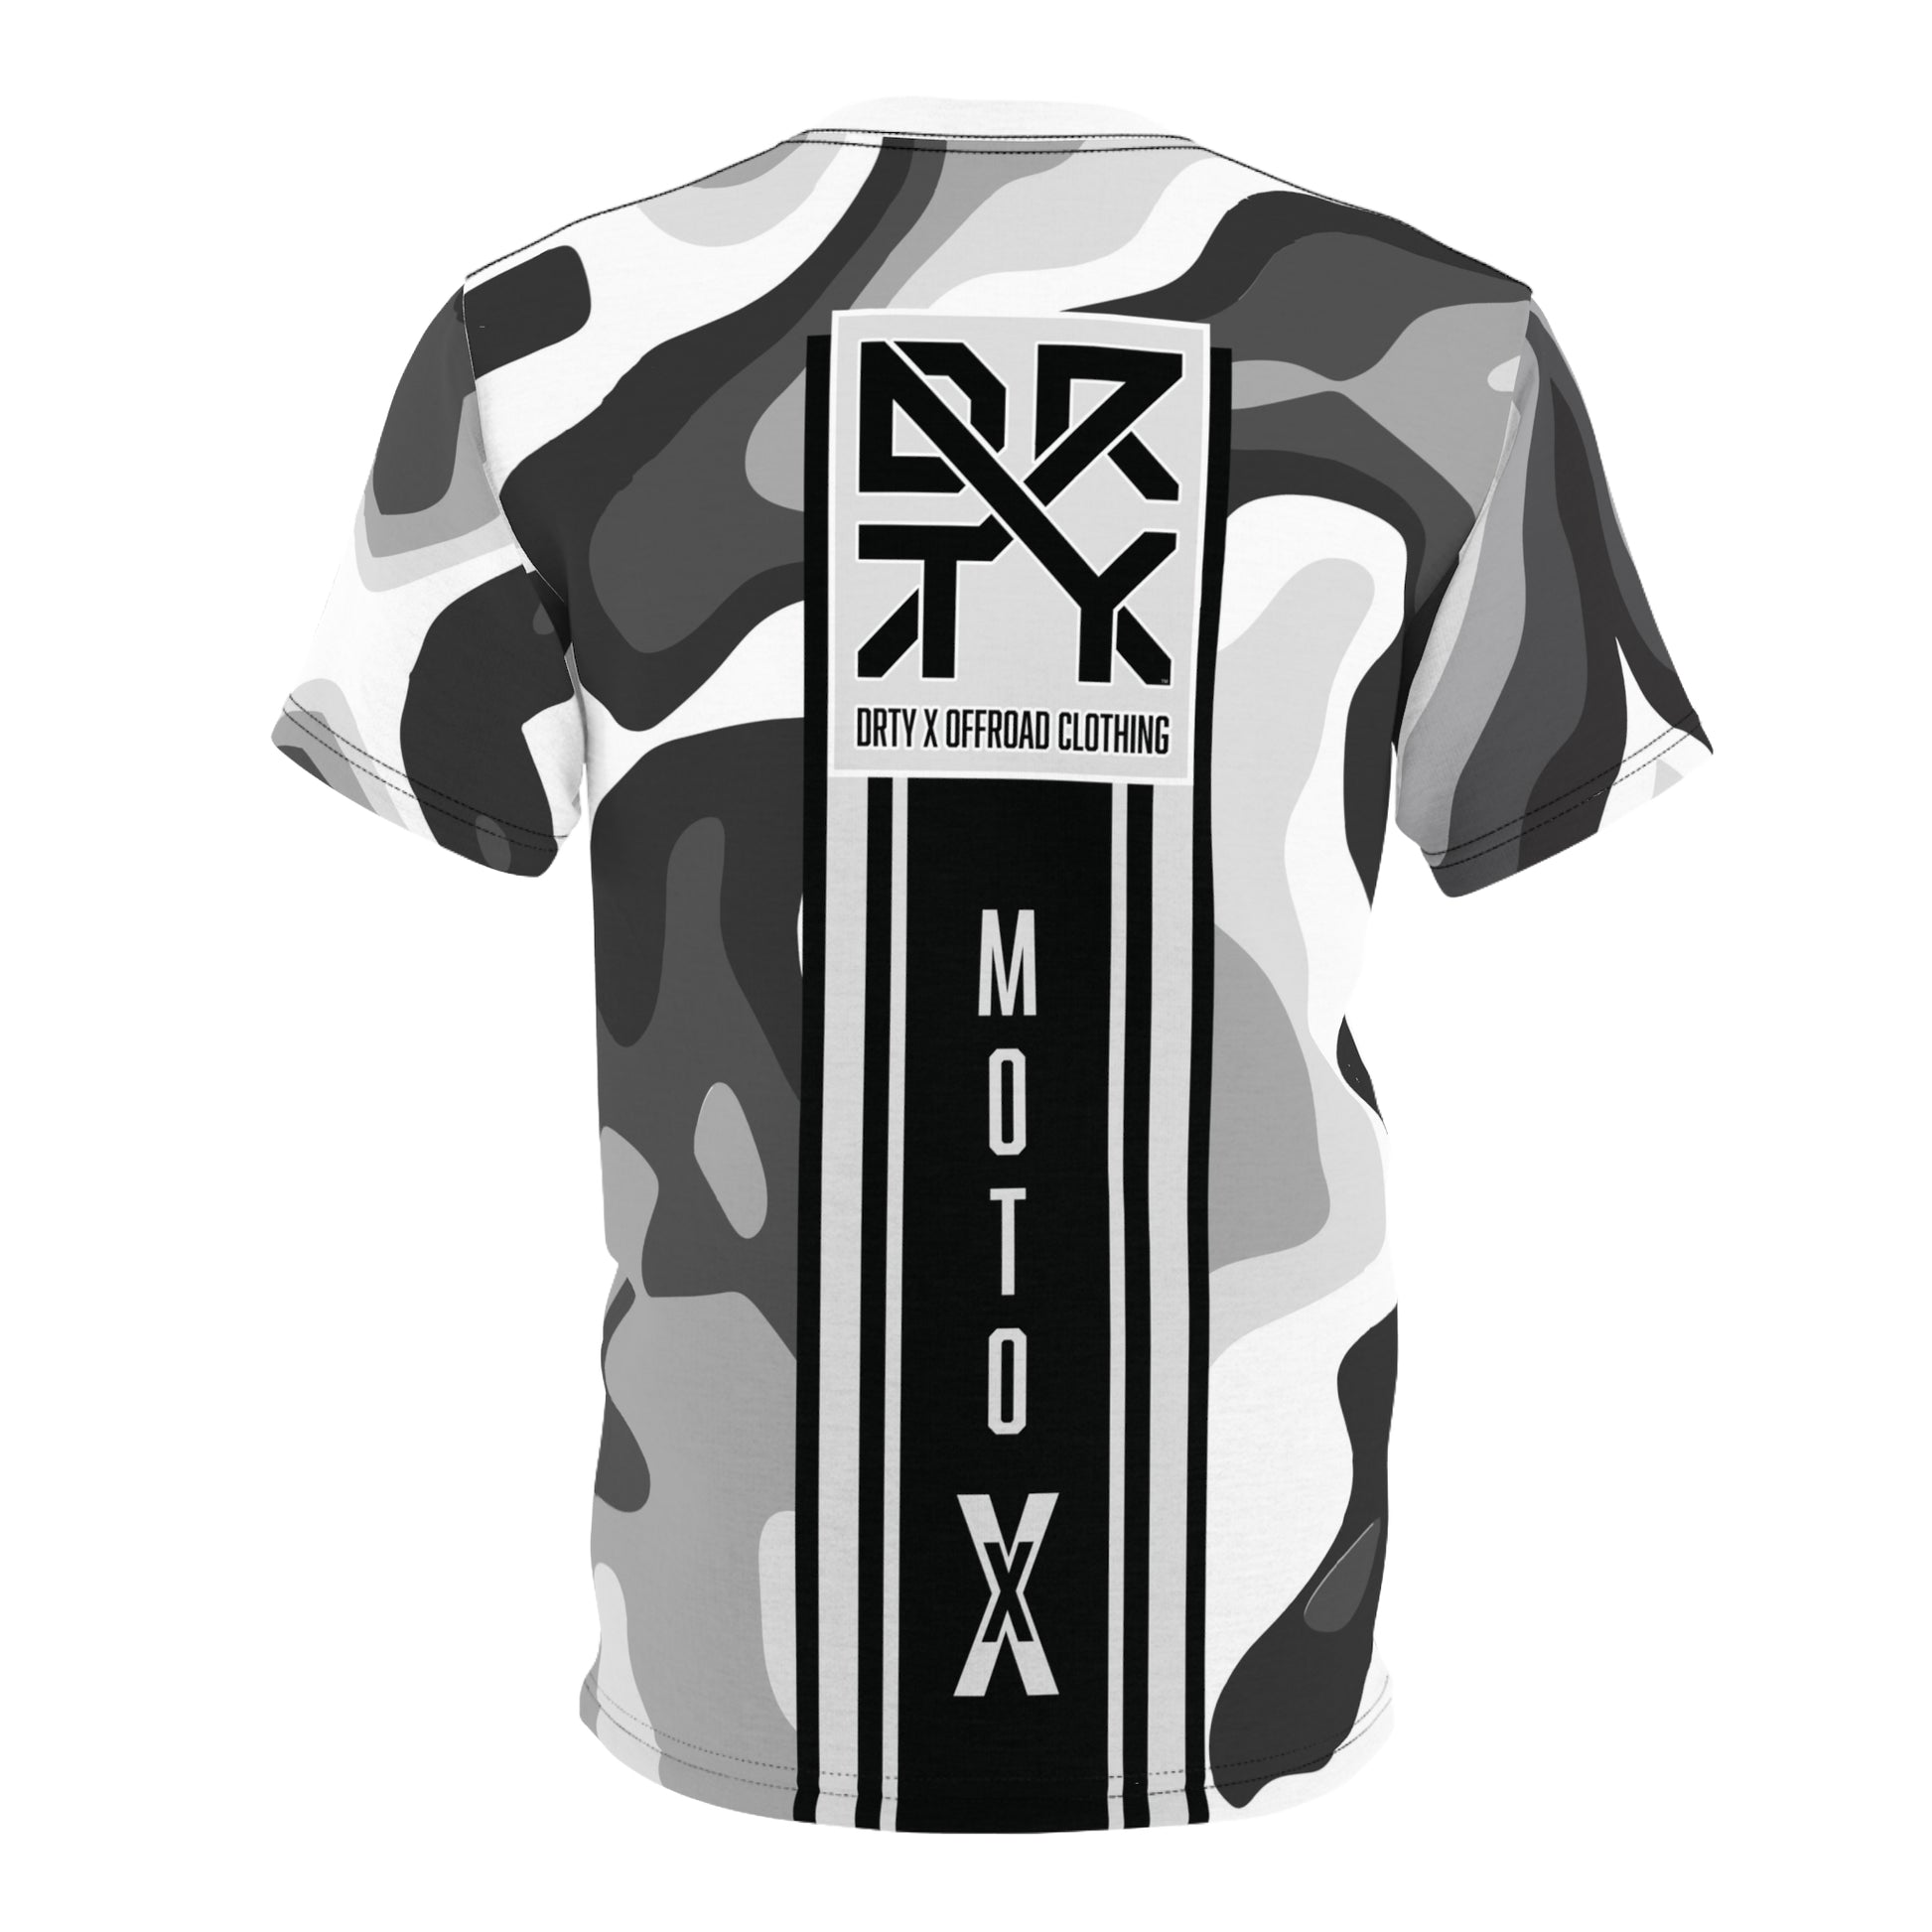 This image showcases a T-shirt with our logo and moto X text with stripes on the back over a camouflage pattern. 